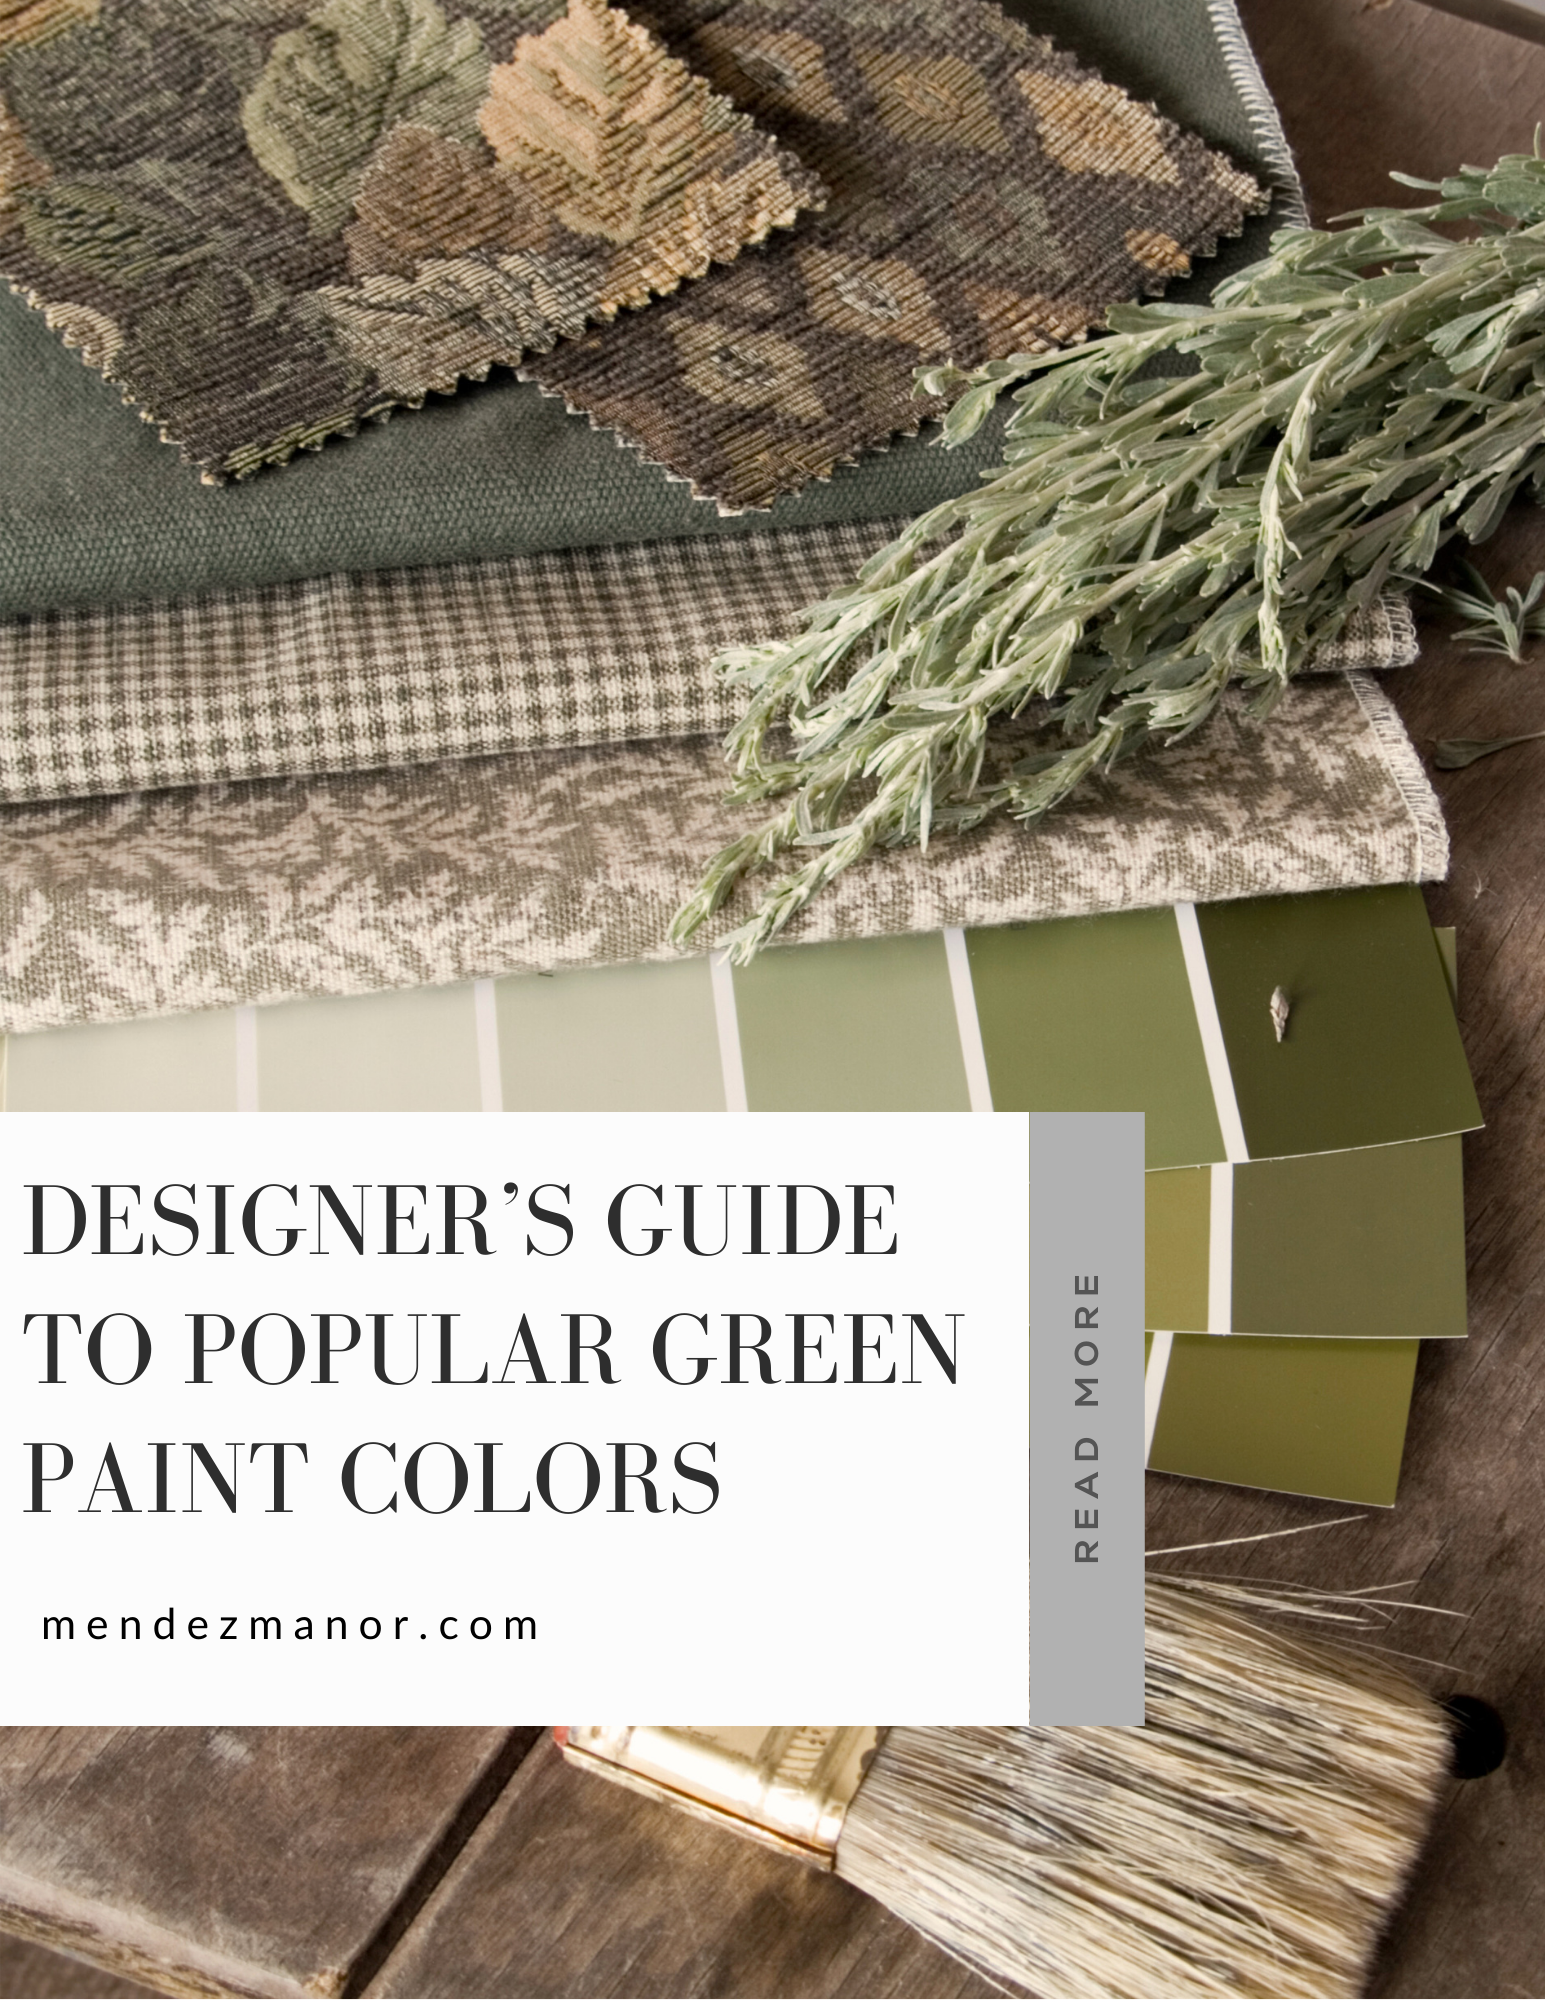 Designer's Guide to Popular Green Paint Colors